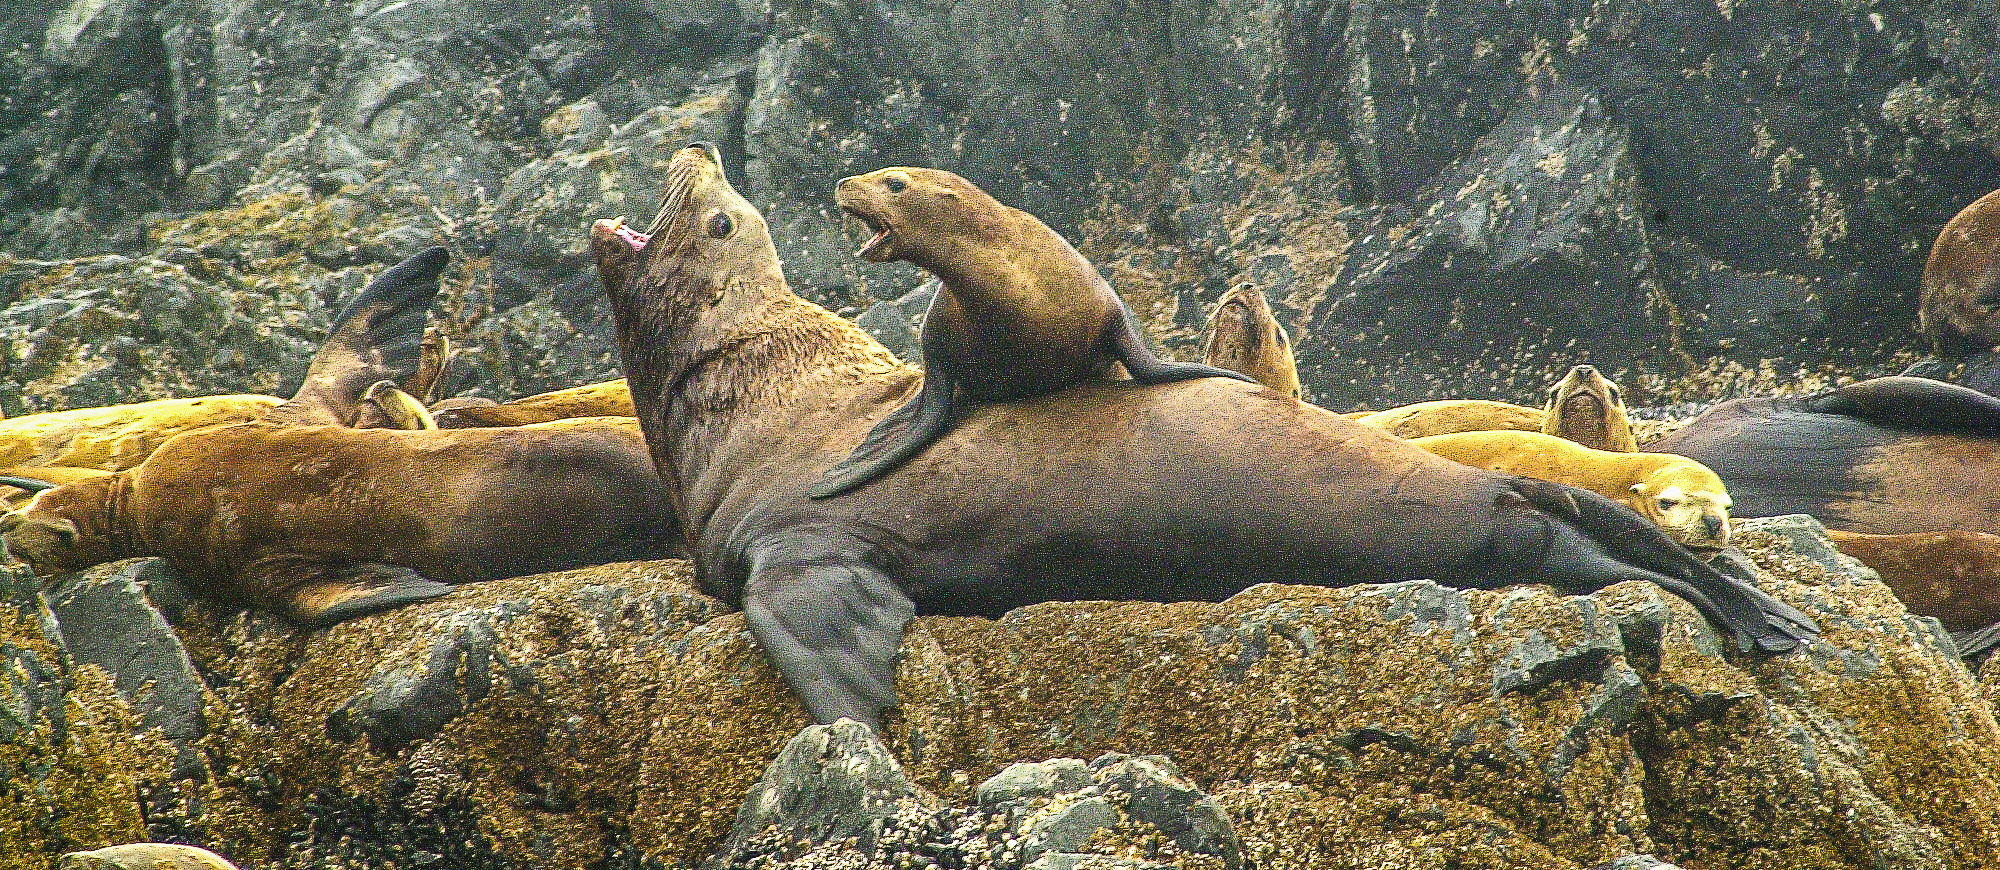 Help UBC's Marine Mammal Research Unit learn more about sea lions and other marine mammals